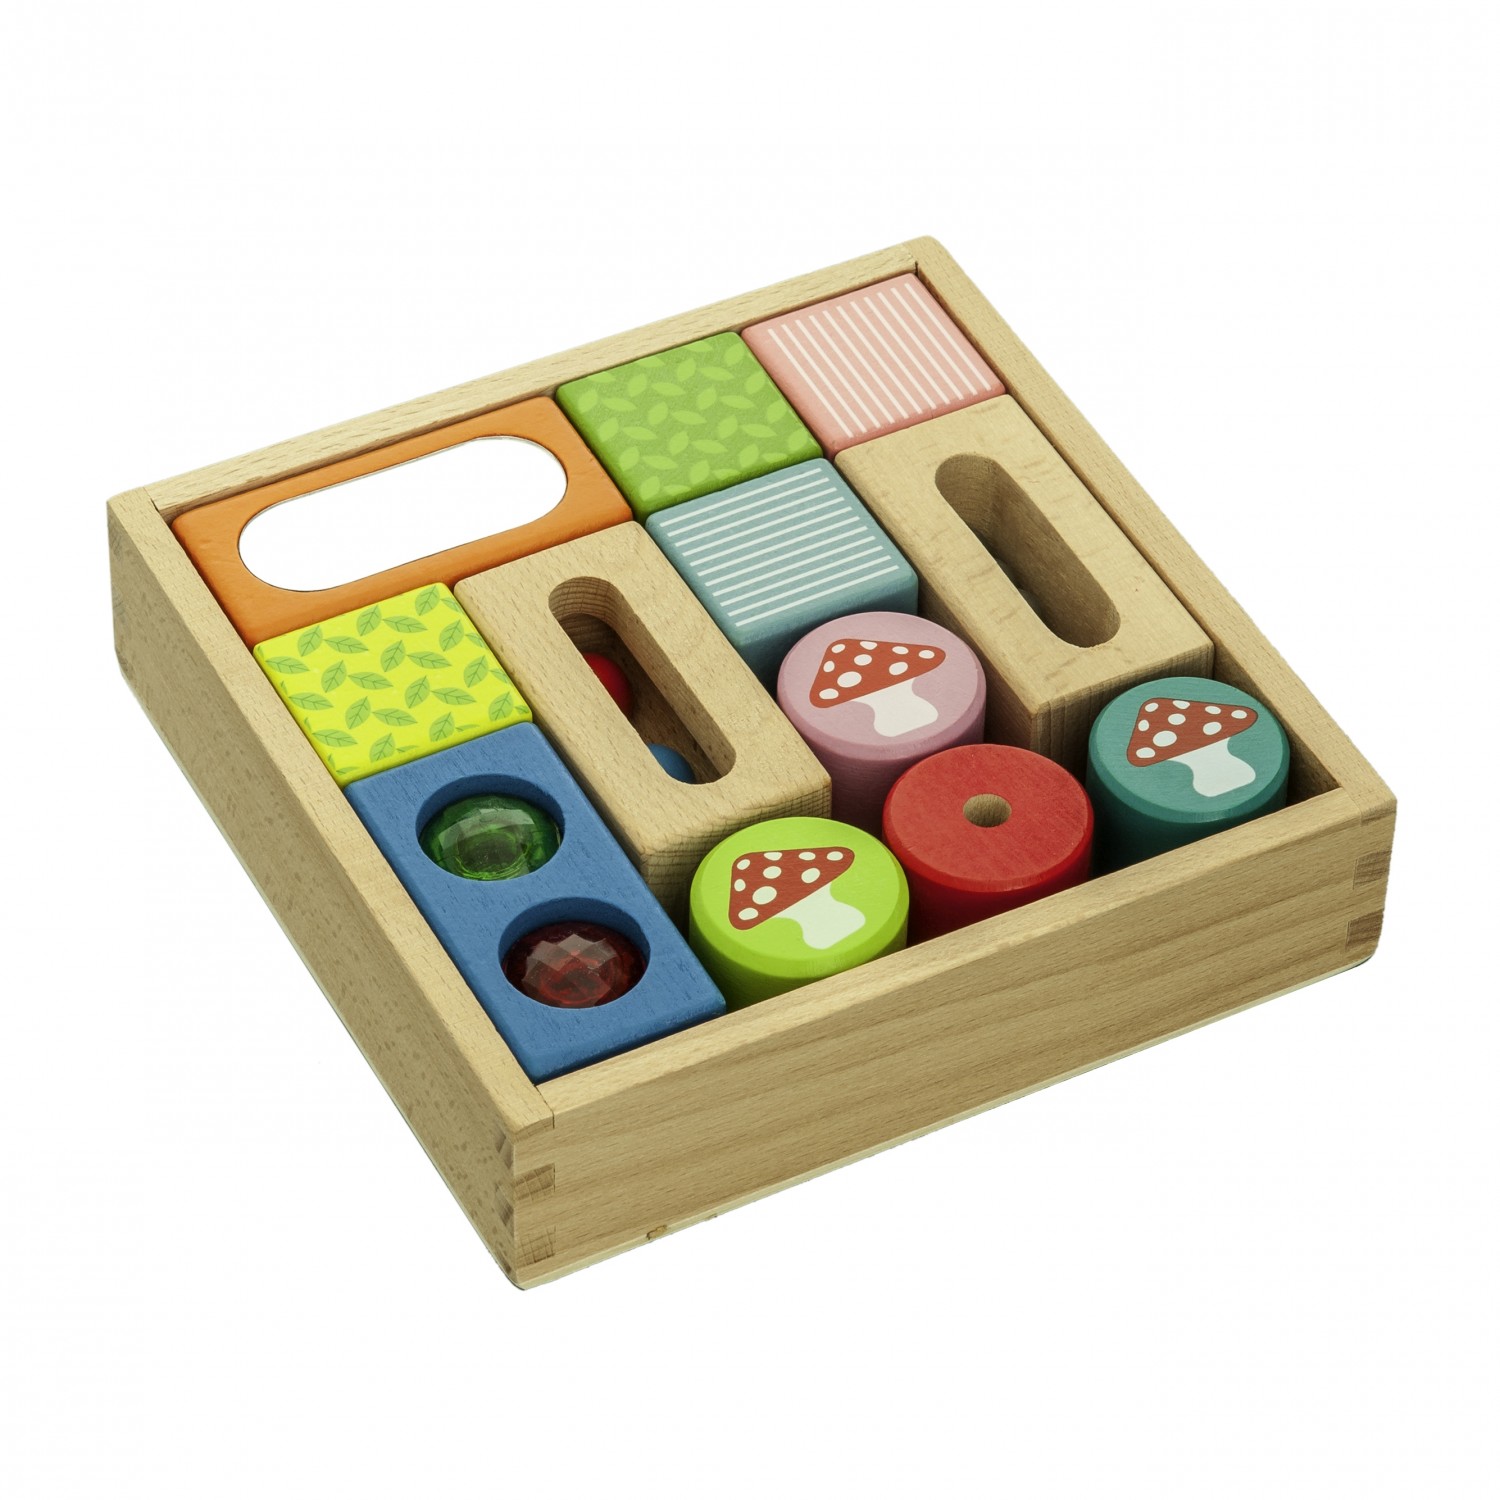 EverEarth Discovery Blocks using FSC® wood educational toy